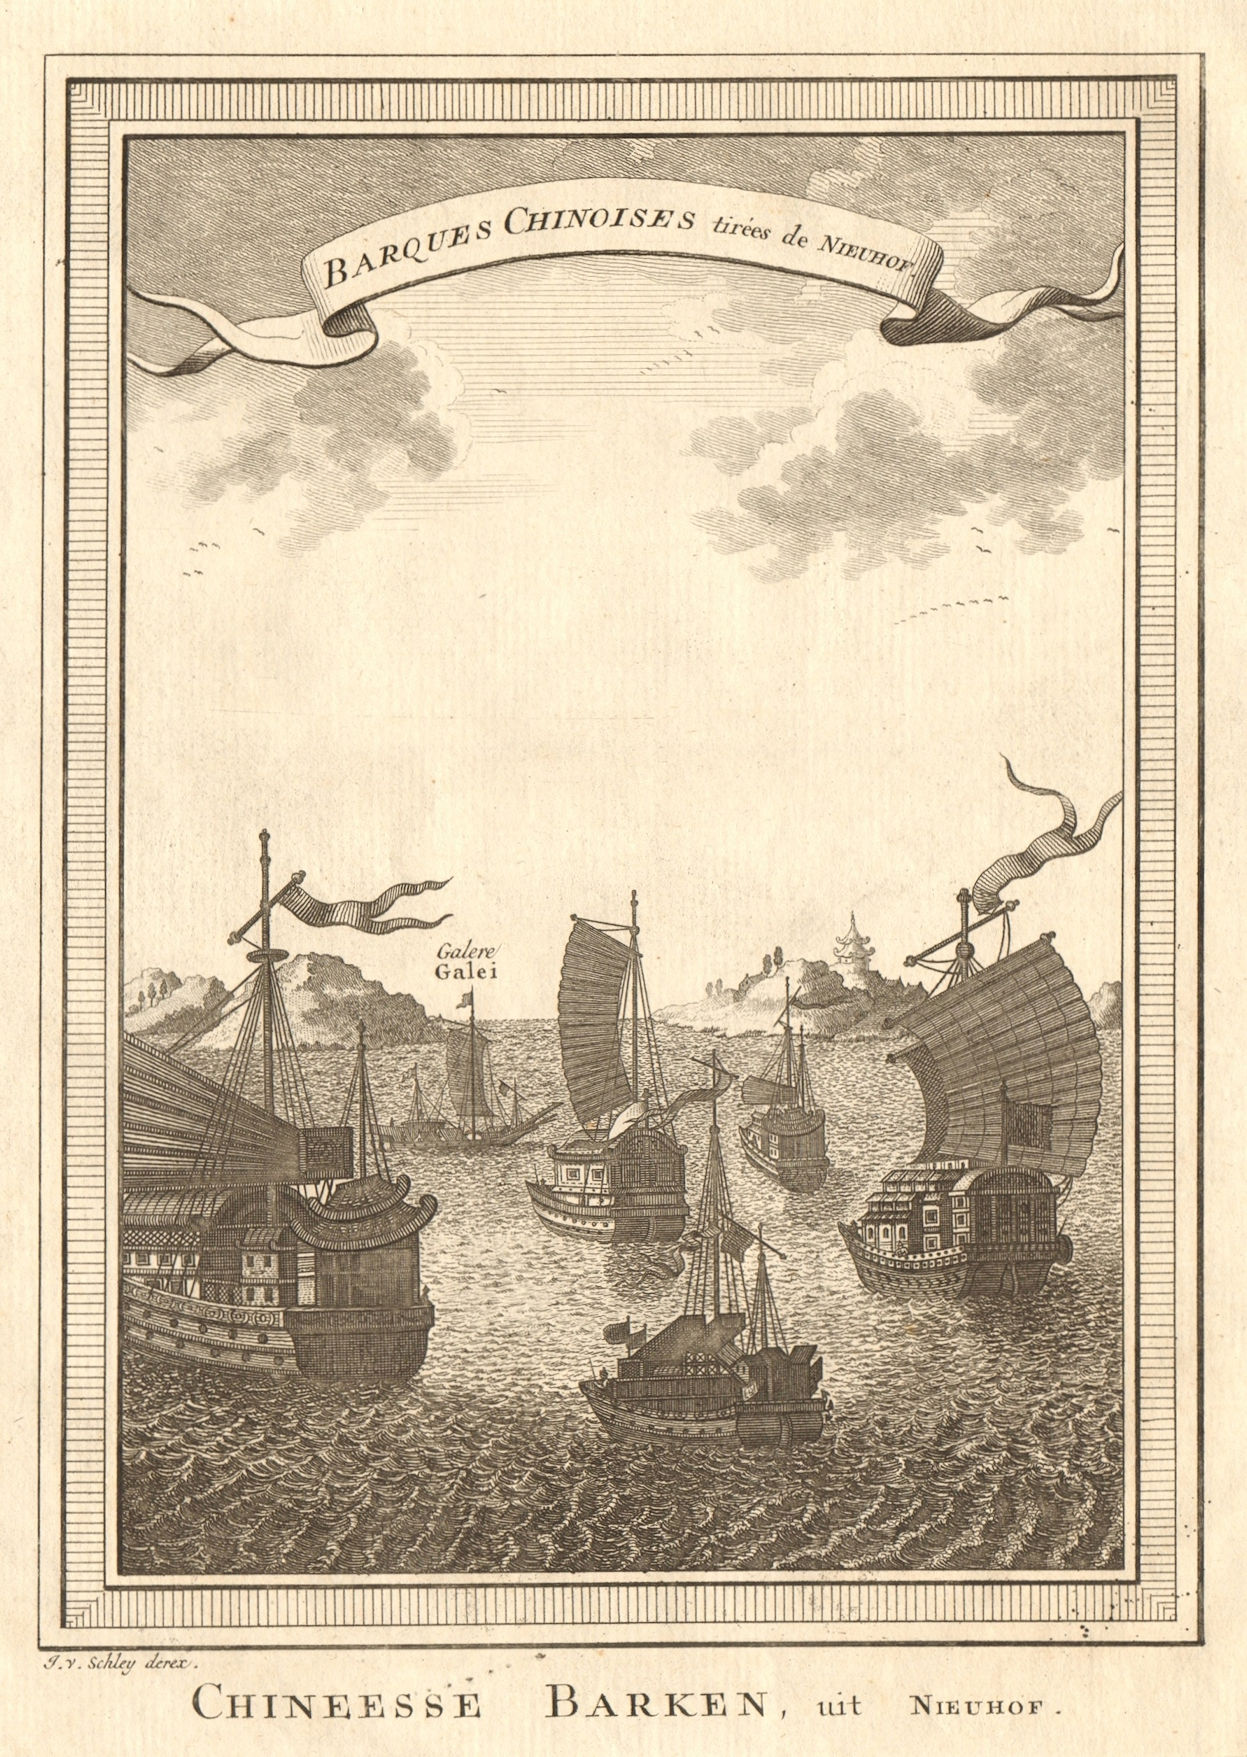 Associate Product 'Barques Chinoises'. China. Chinese junks or boats. SCHLEY 1749 old print